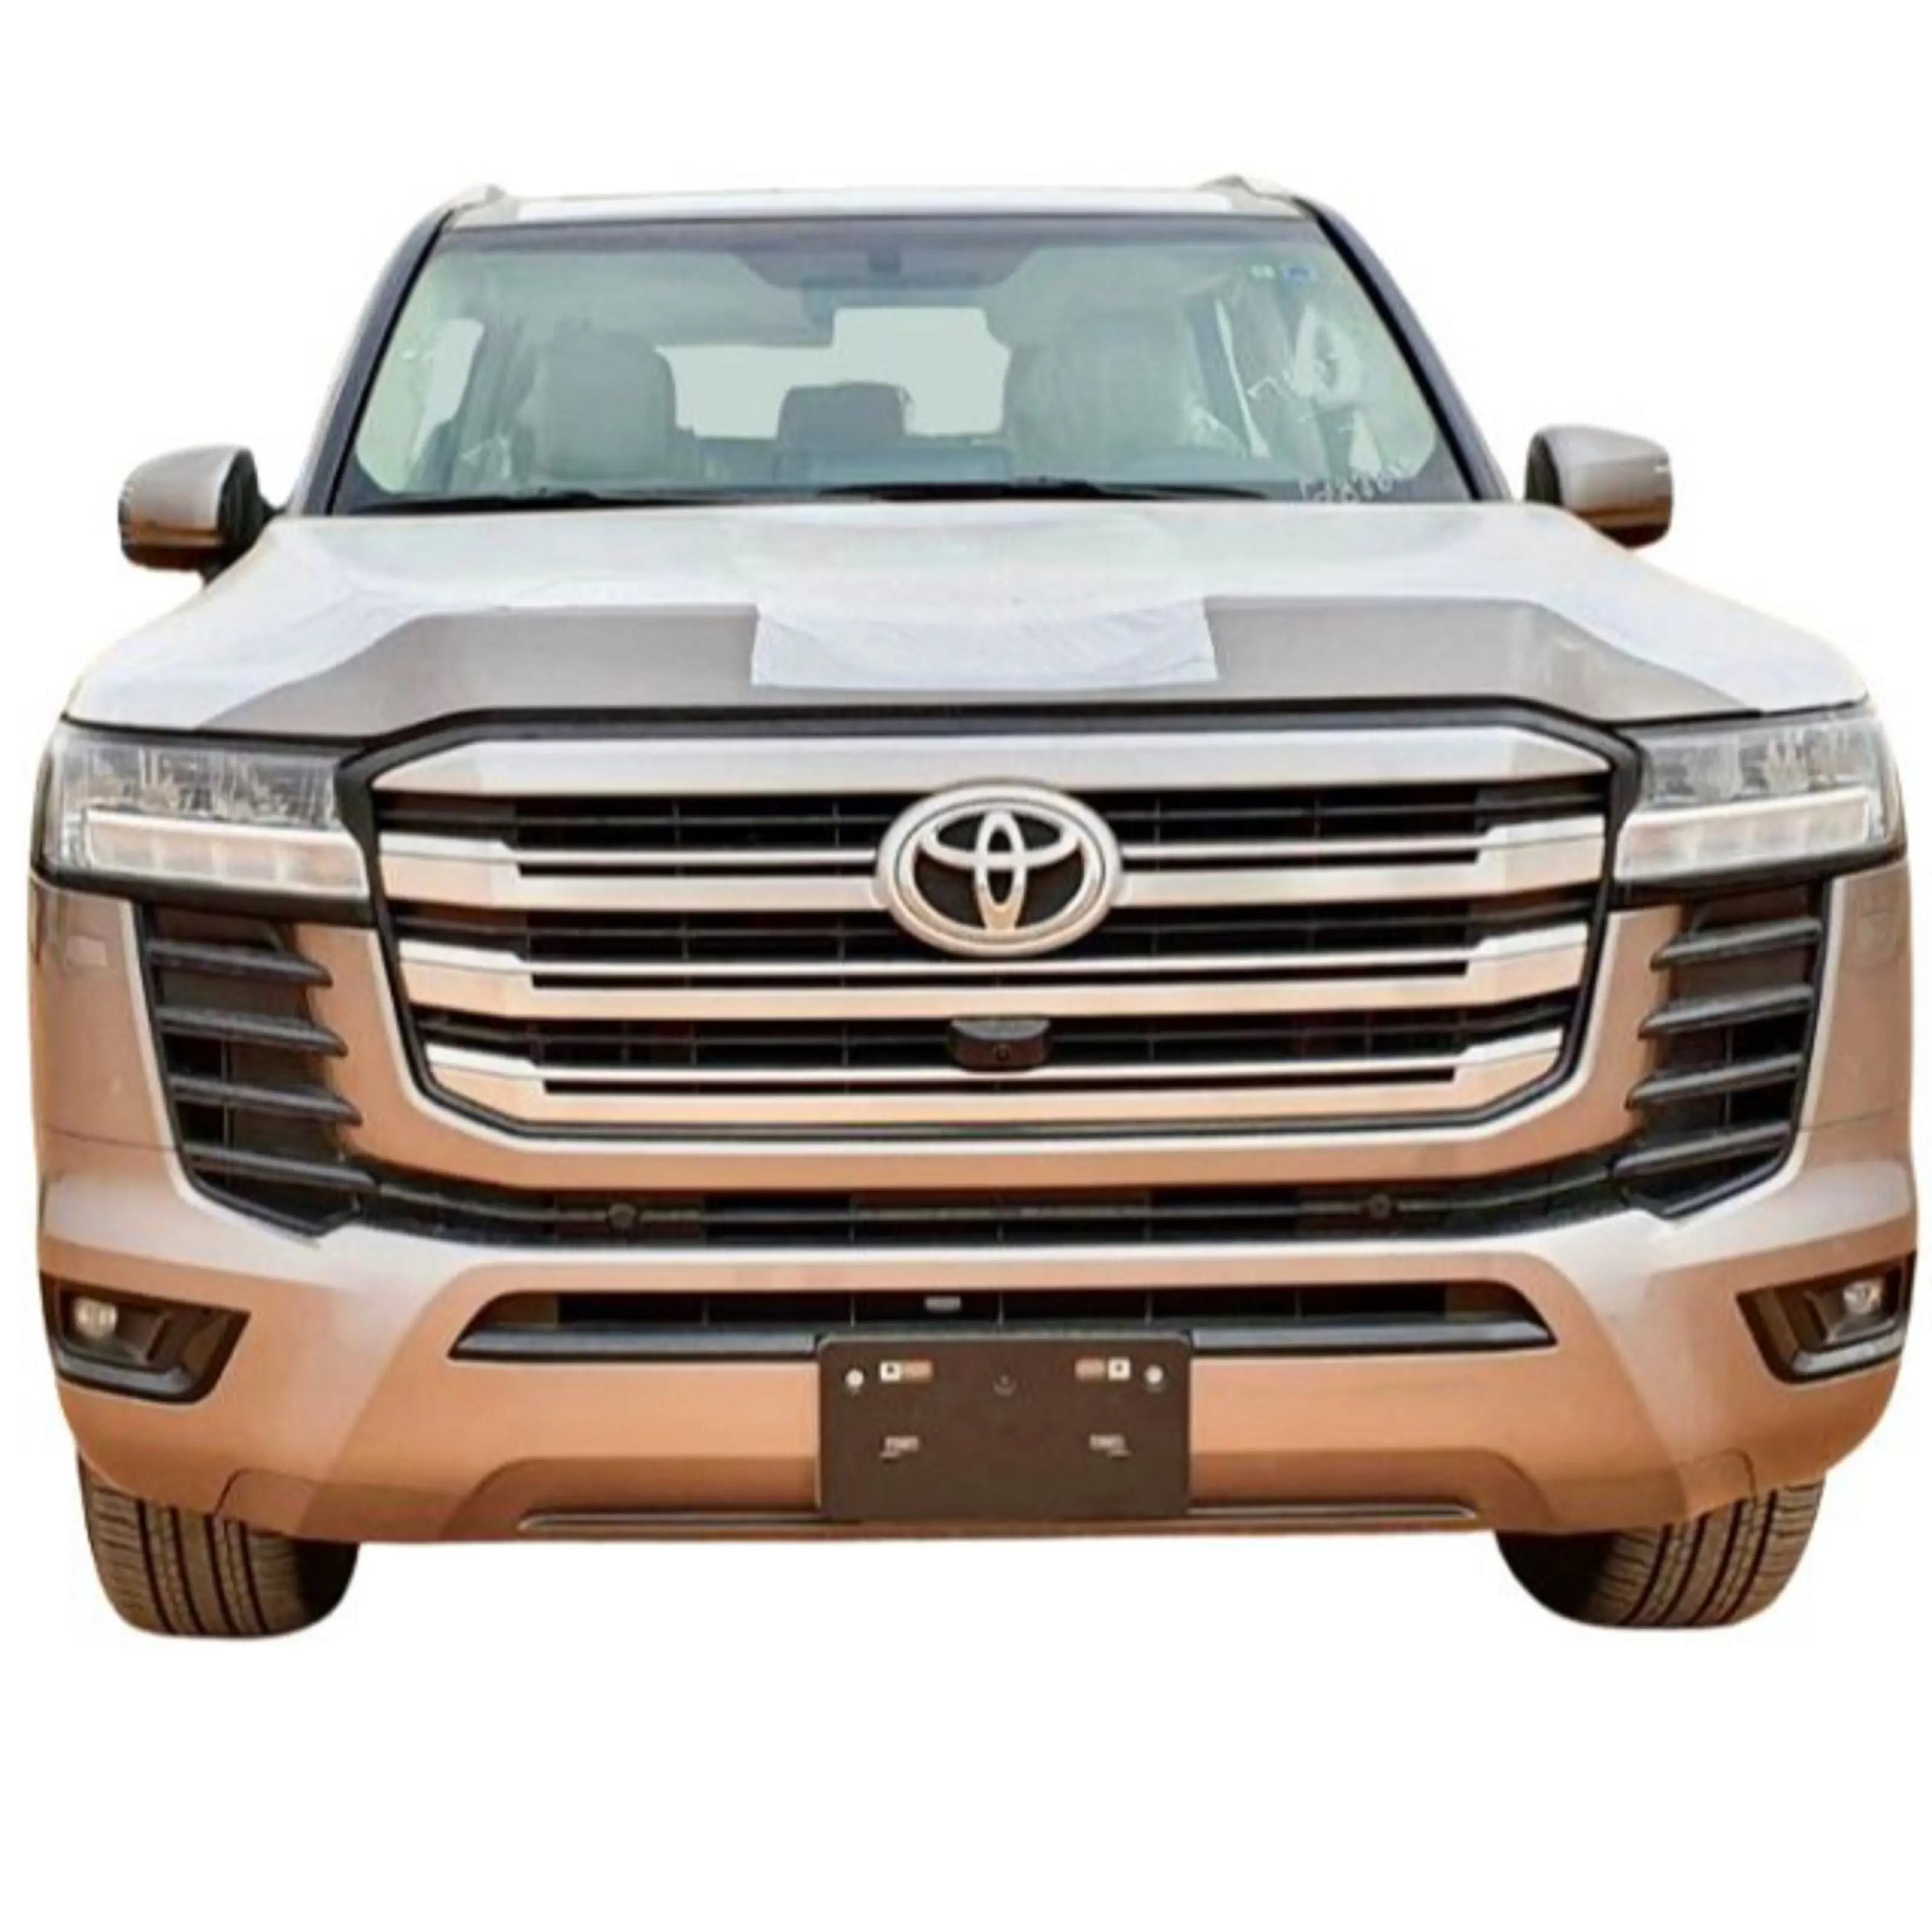 2020 Toyota Land Cruiser fairly used toyota cars for sale